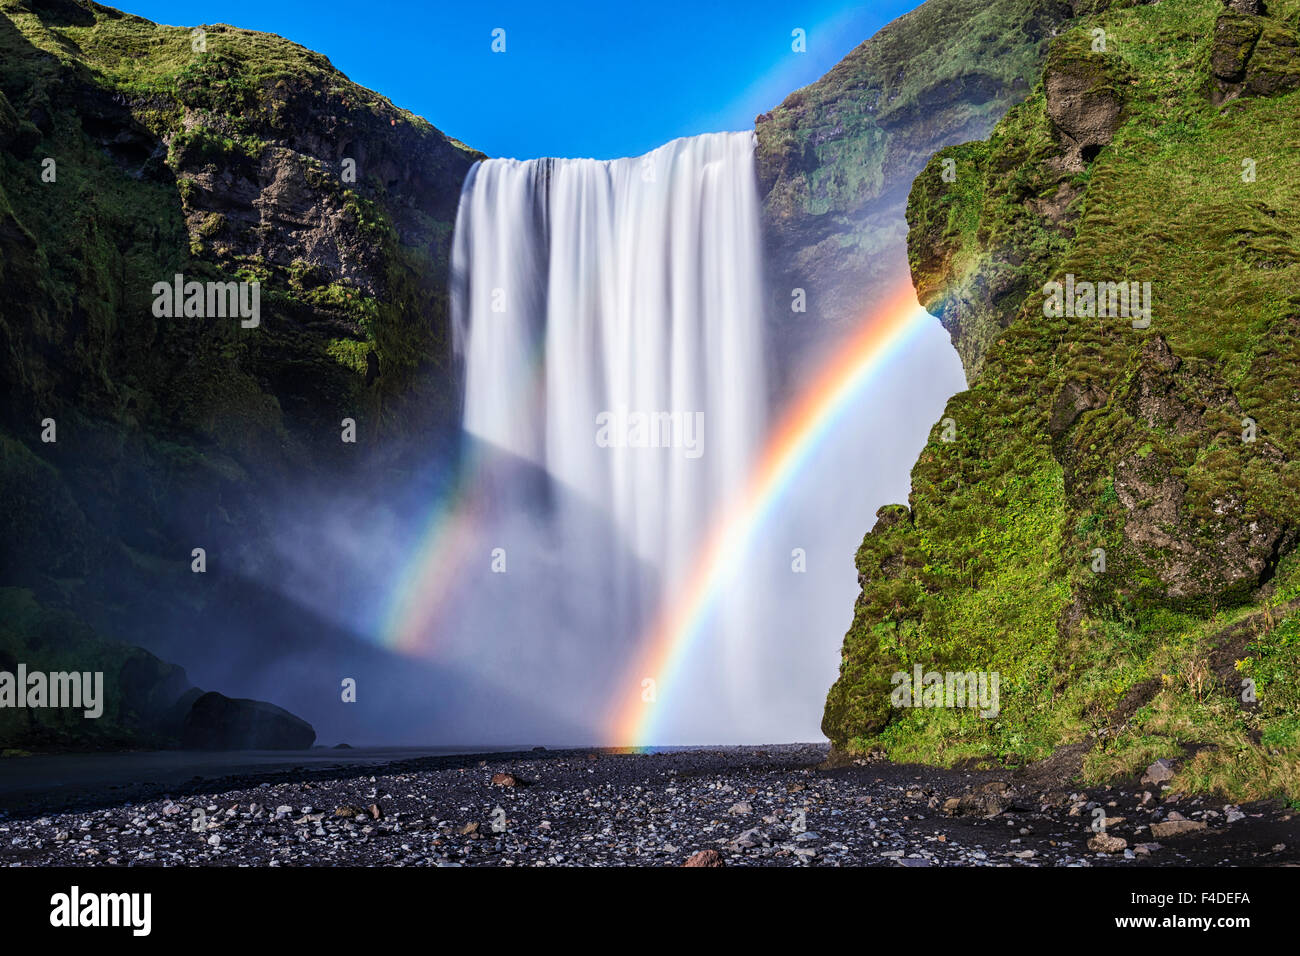 Iceland, Skogafoss. Waterfall and rainbow. Credit as: Dennis Kirkland / Jaynes Gallery / DanitaDelimont.com (Not available for 2019 Calendars in German speaking countries) Stock Photo